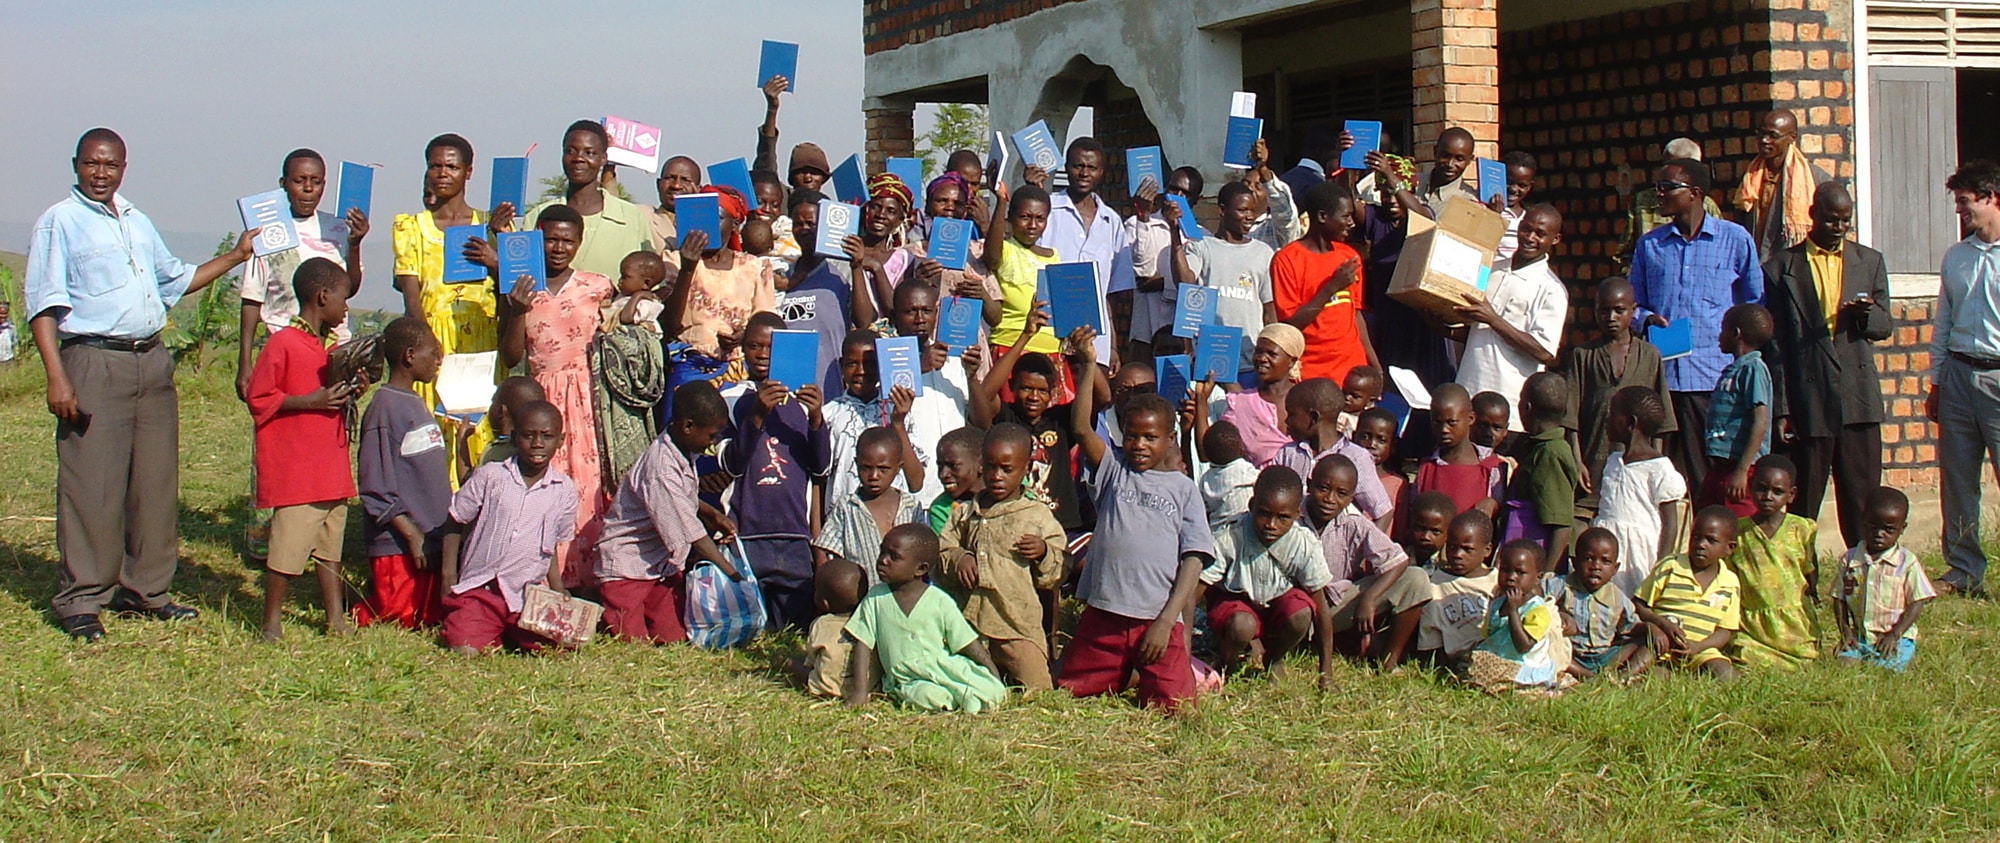 Uganda Group Outside Church Holding Up Luther's Small Catechisms